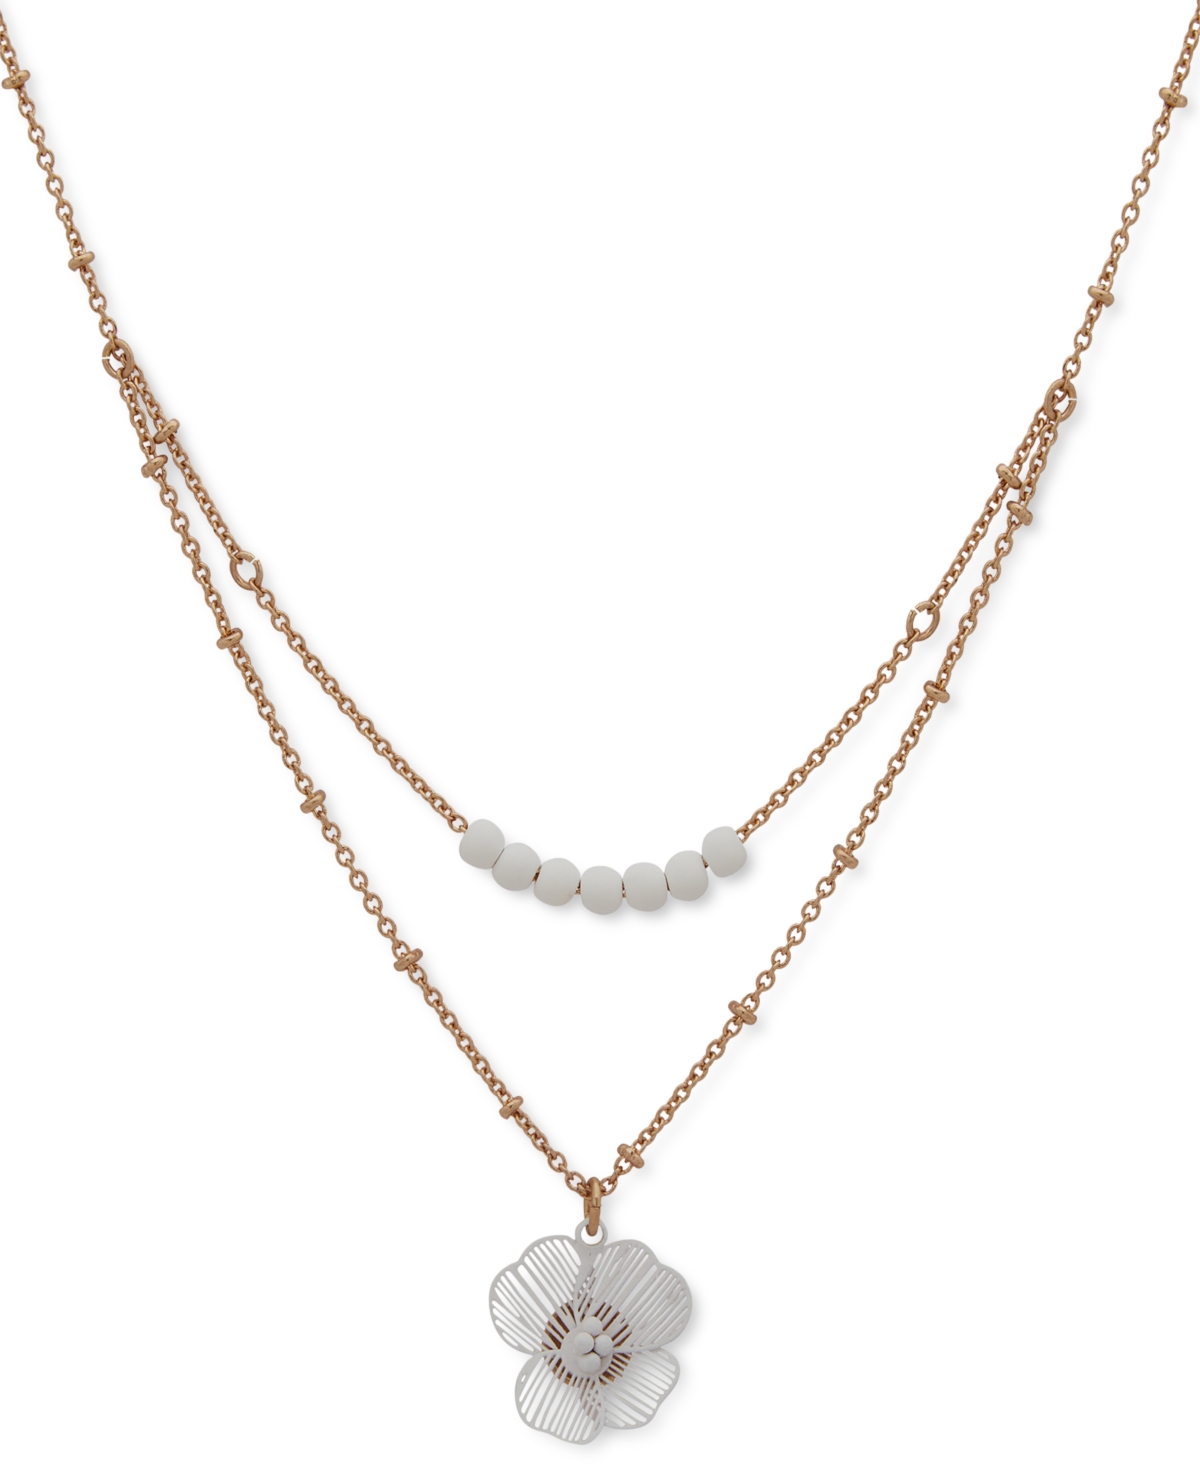 Lonna & Lilly Gold-tone Color Artistic Flower Beaded Layered Pendant Necklace, 16" + 3" Extender In White